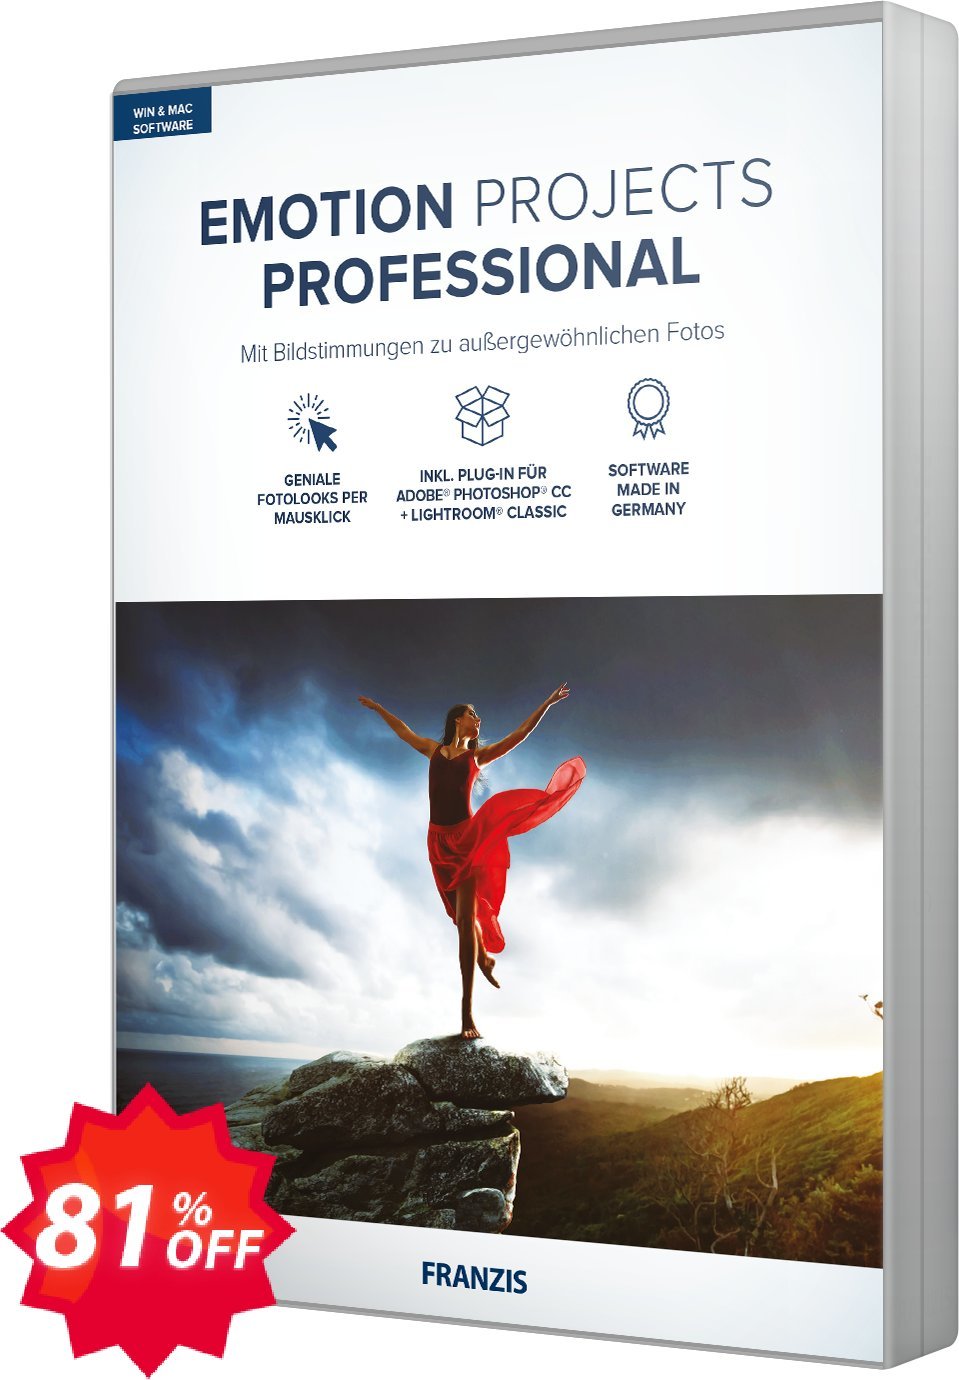 EMOTION Projects Professional Coupon code 81% discount 